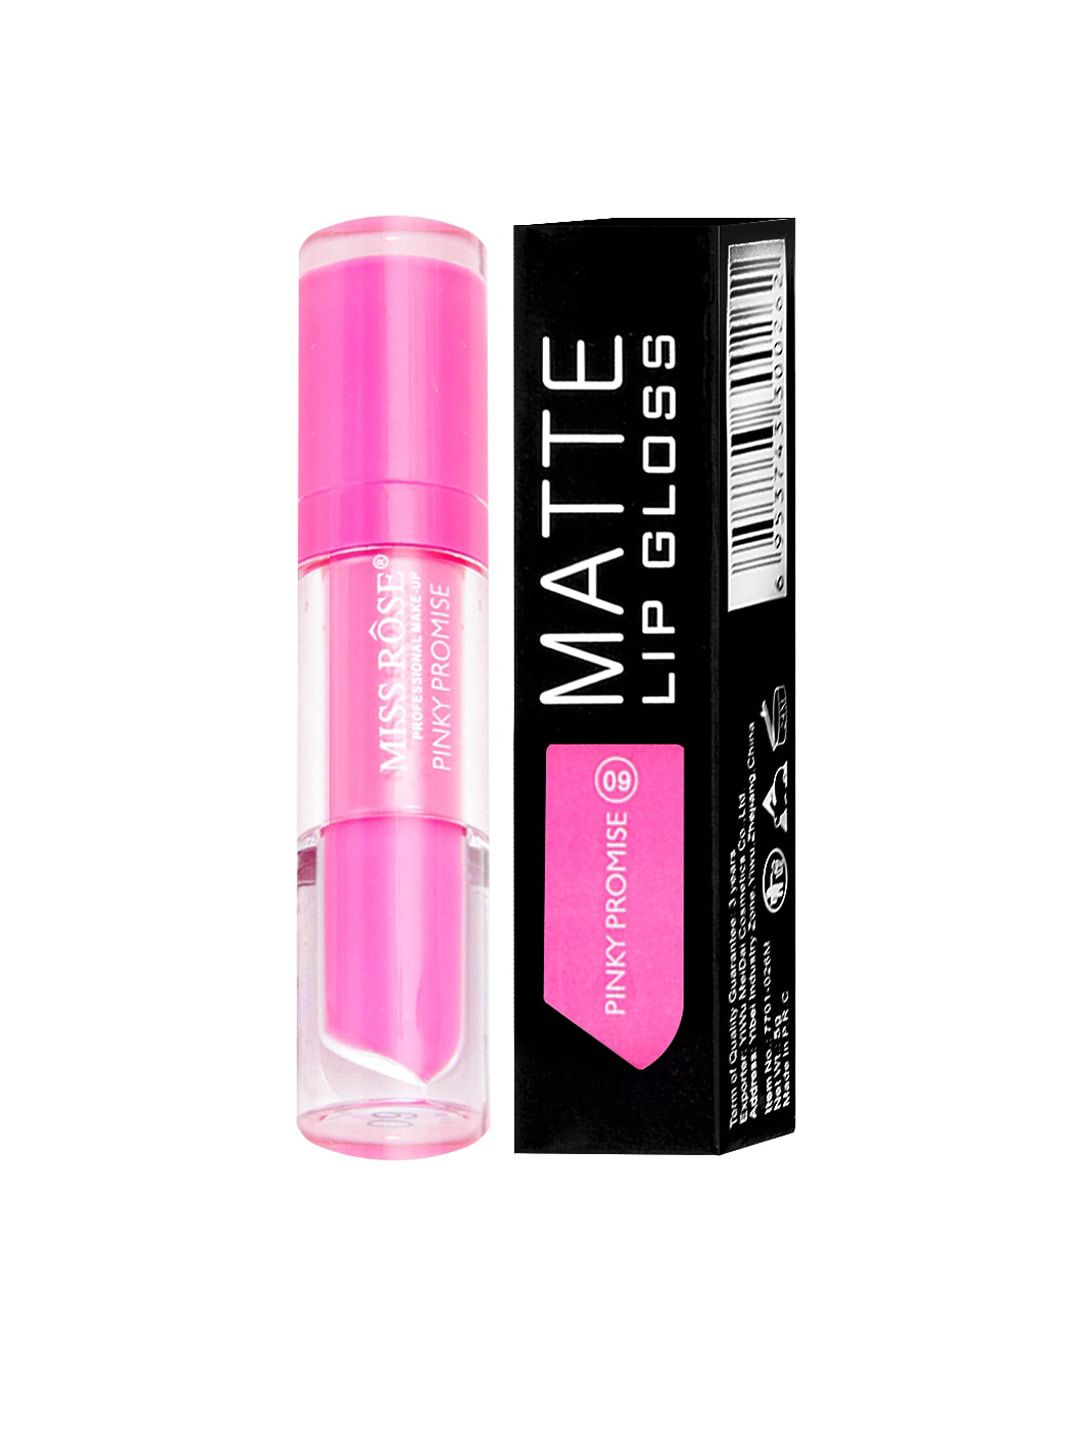 MISS ROSE Matte LipGloss Pinky Promise 7701-026M 09 20 gm Price in India